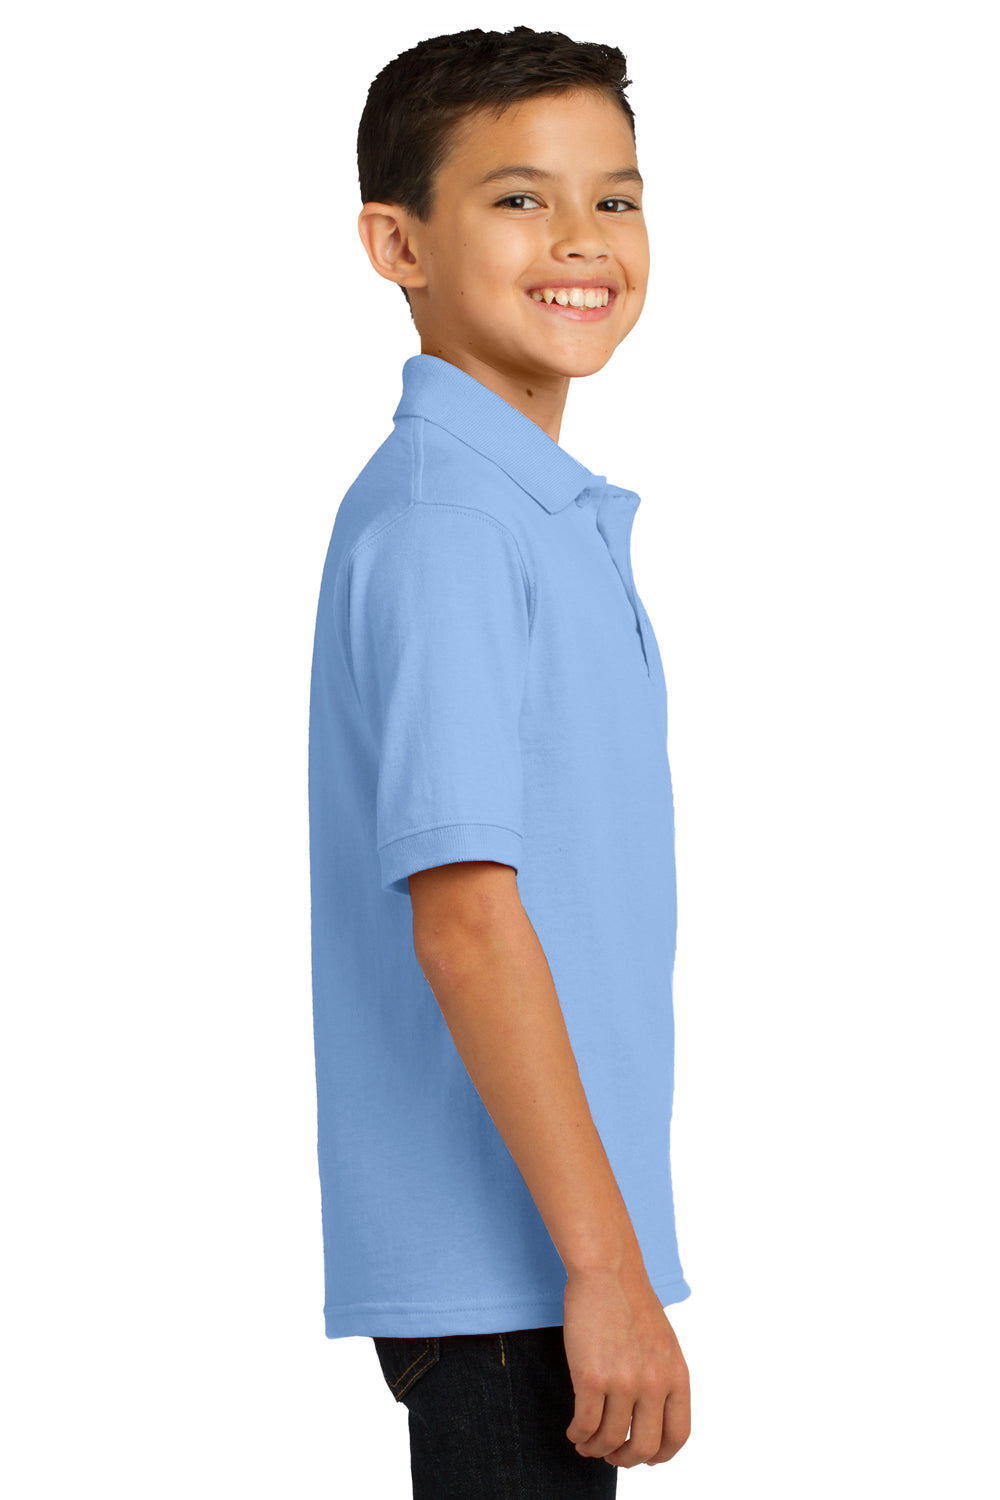 Port & Company KP55Y Youth Core Stain Resistant Short Sleeve Polo Shirt Light Blue Side